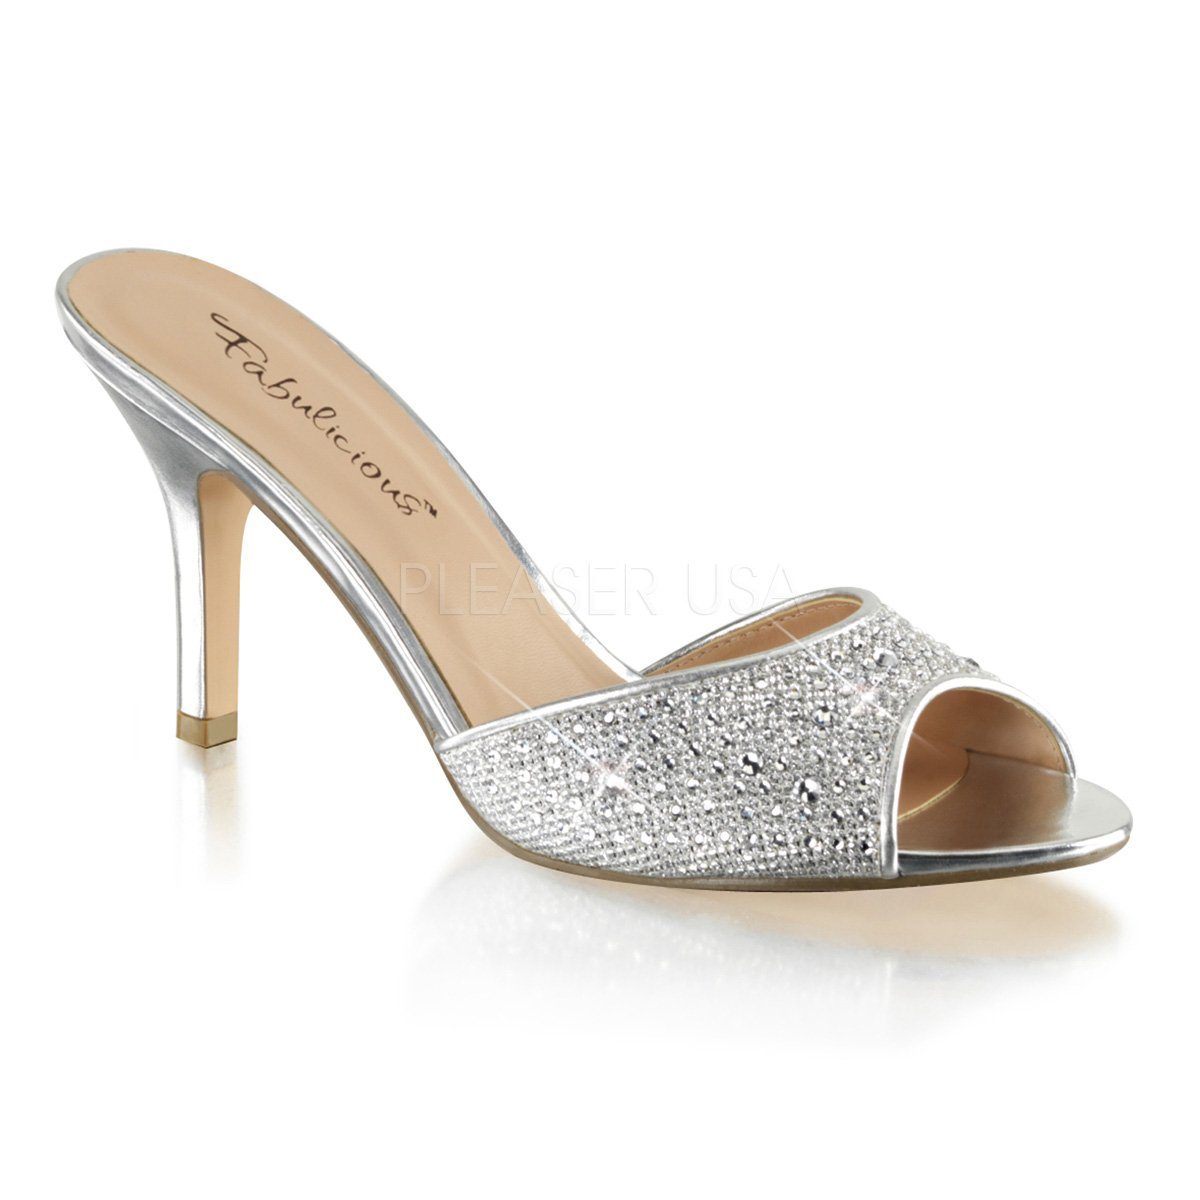 Pantolette High-Heel-Pumps - LUCY-01 Fabulicious Silber